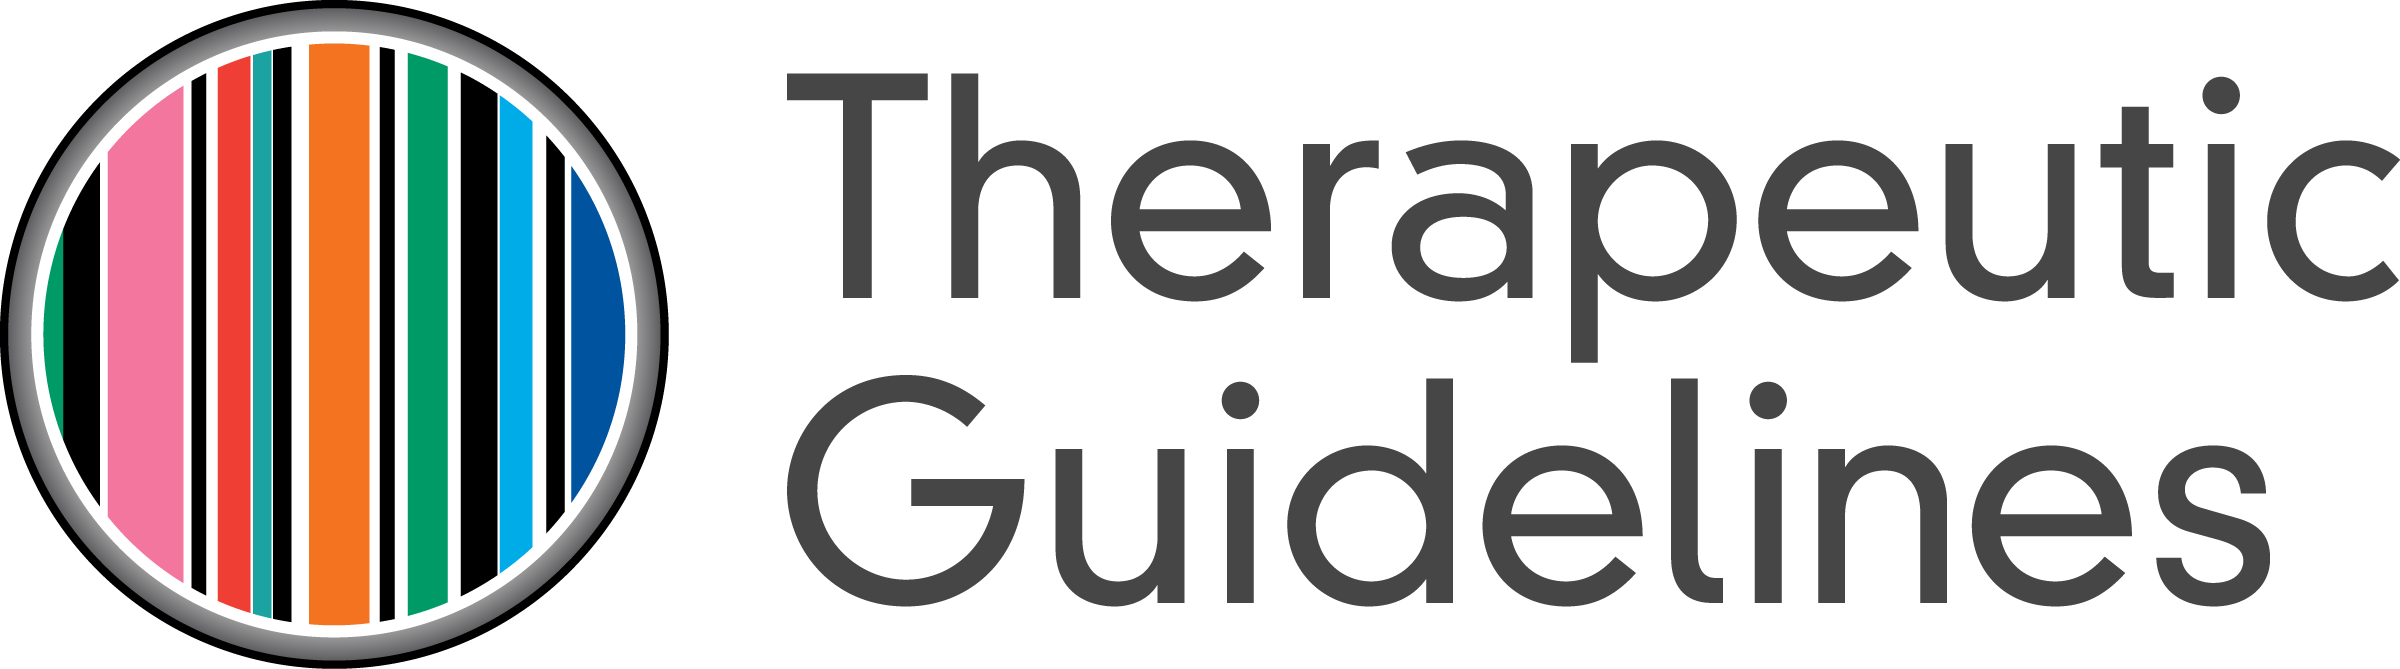 Therapeutic Guidelines logo